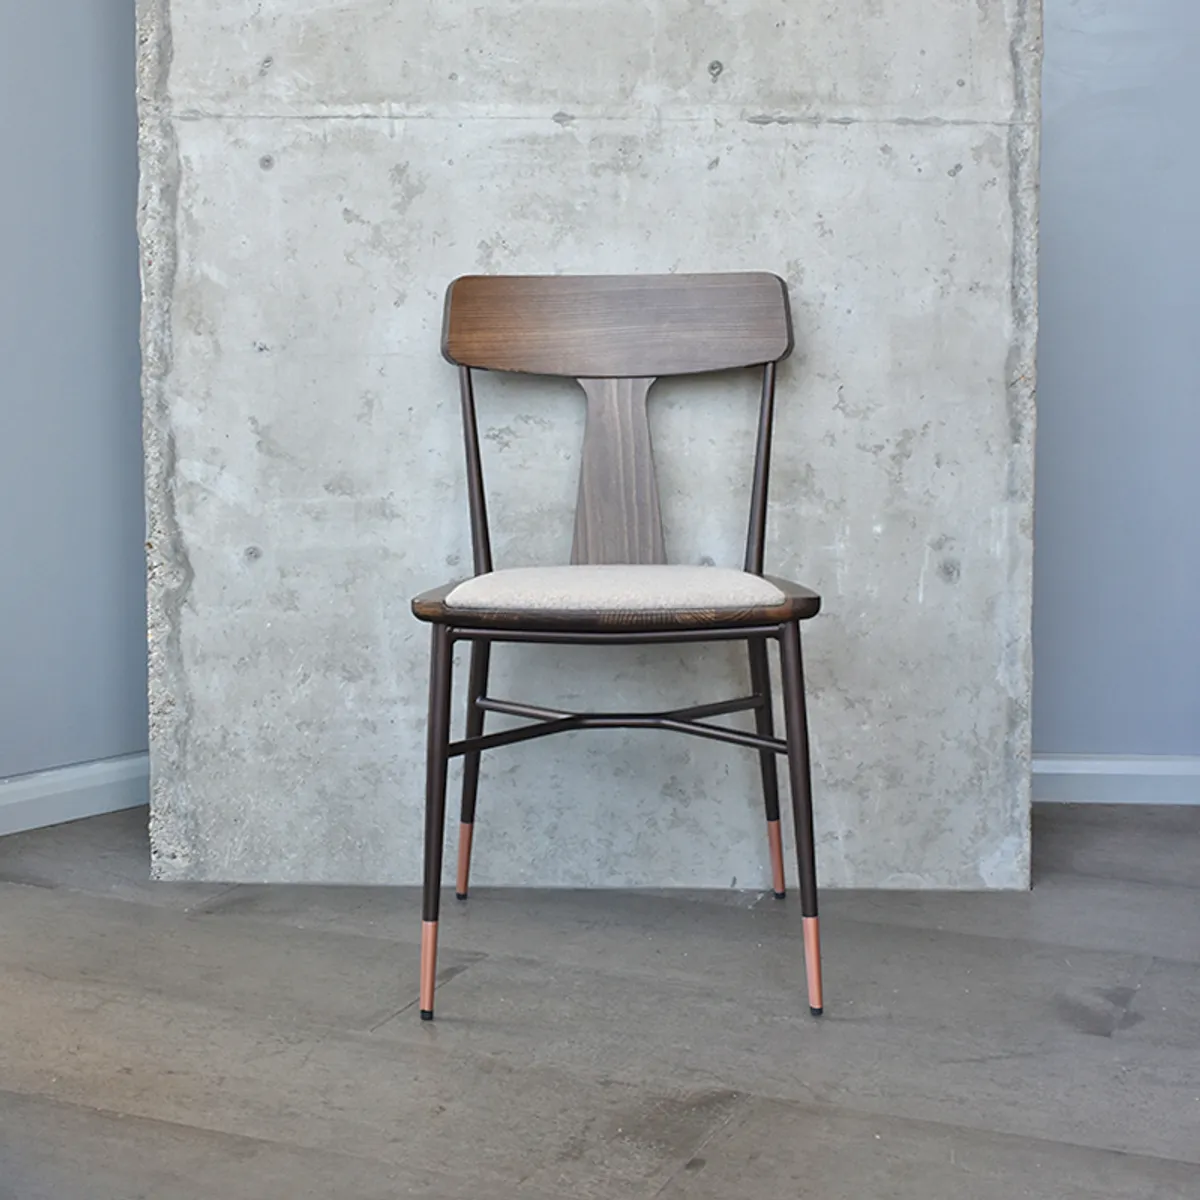 Agatha 3 Chair New Furniture From Milan 2019 By Inside Out Contracts 040